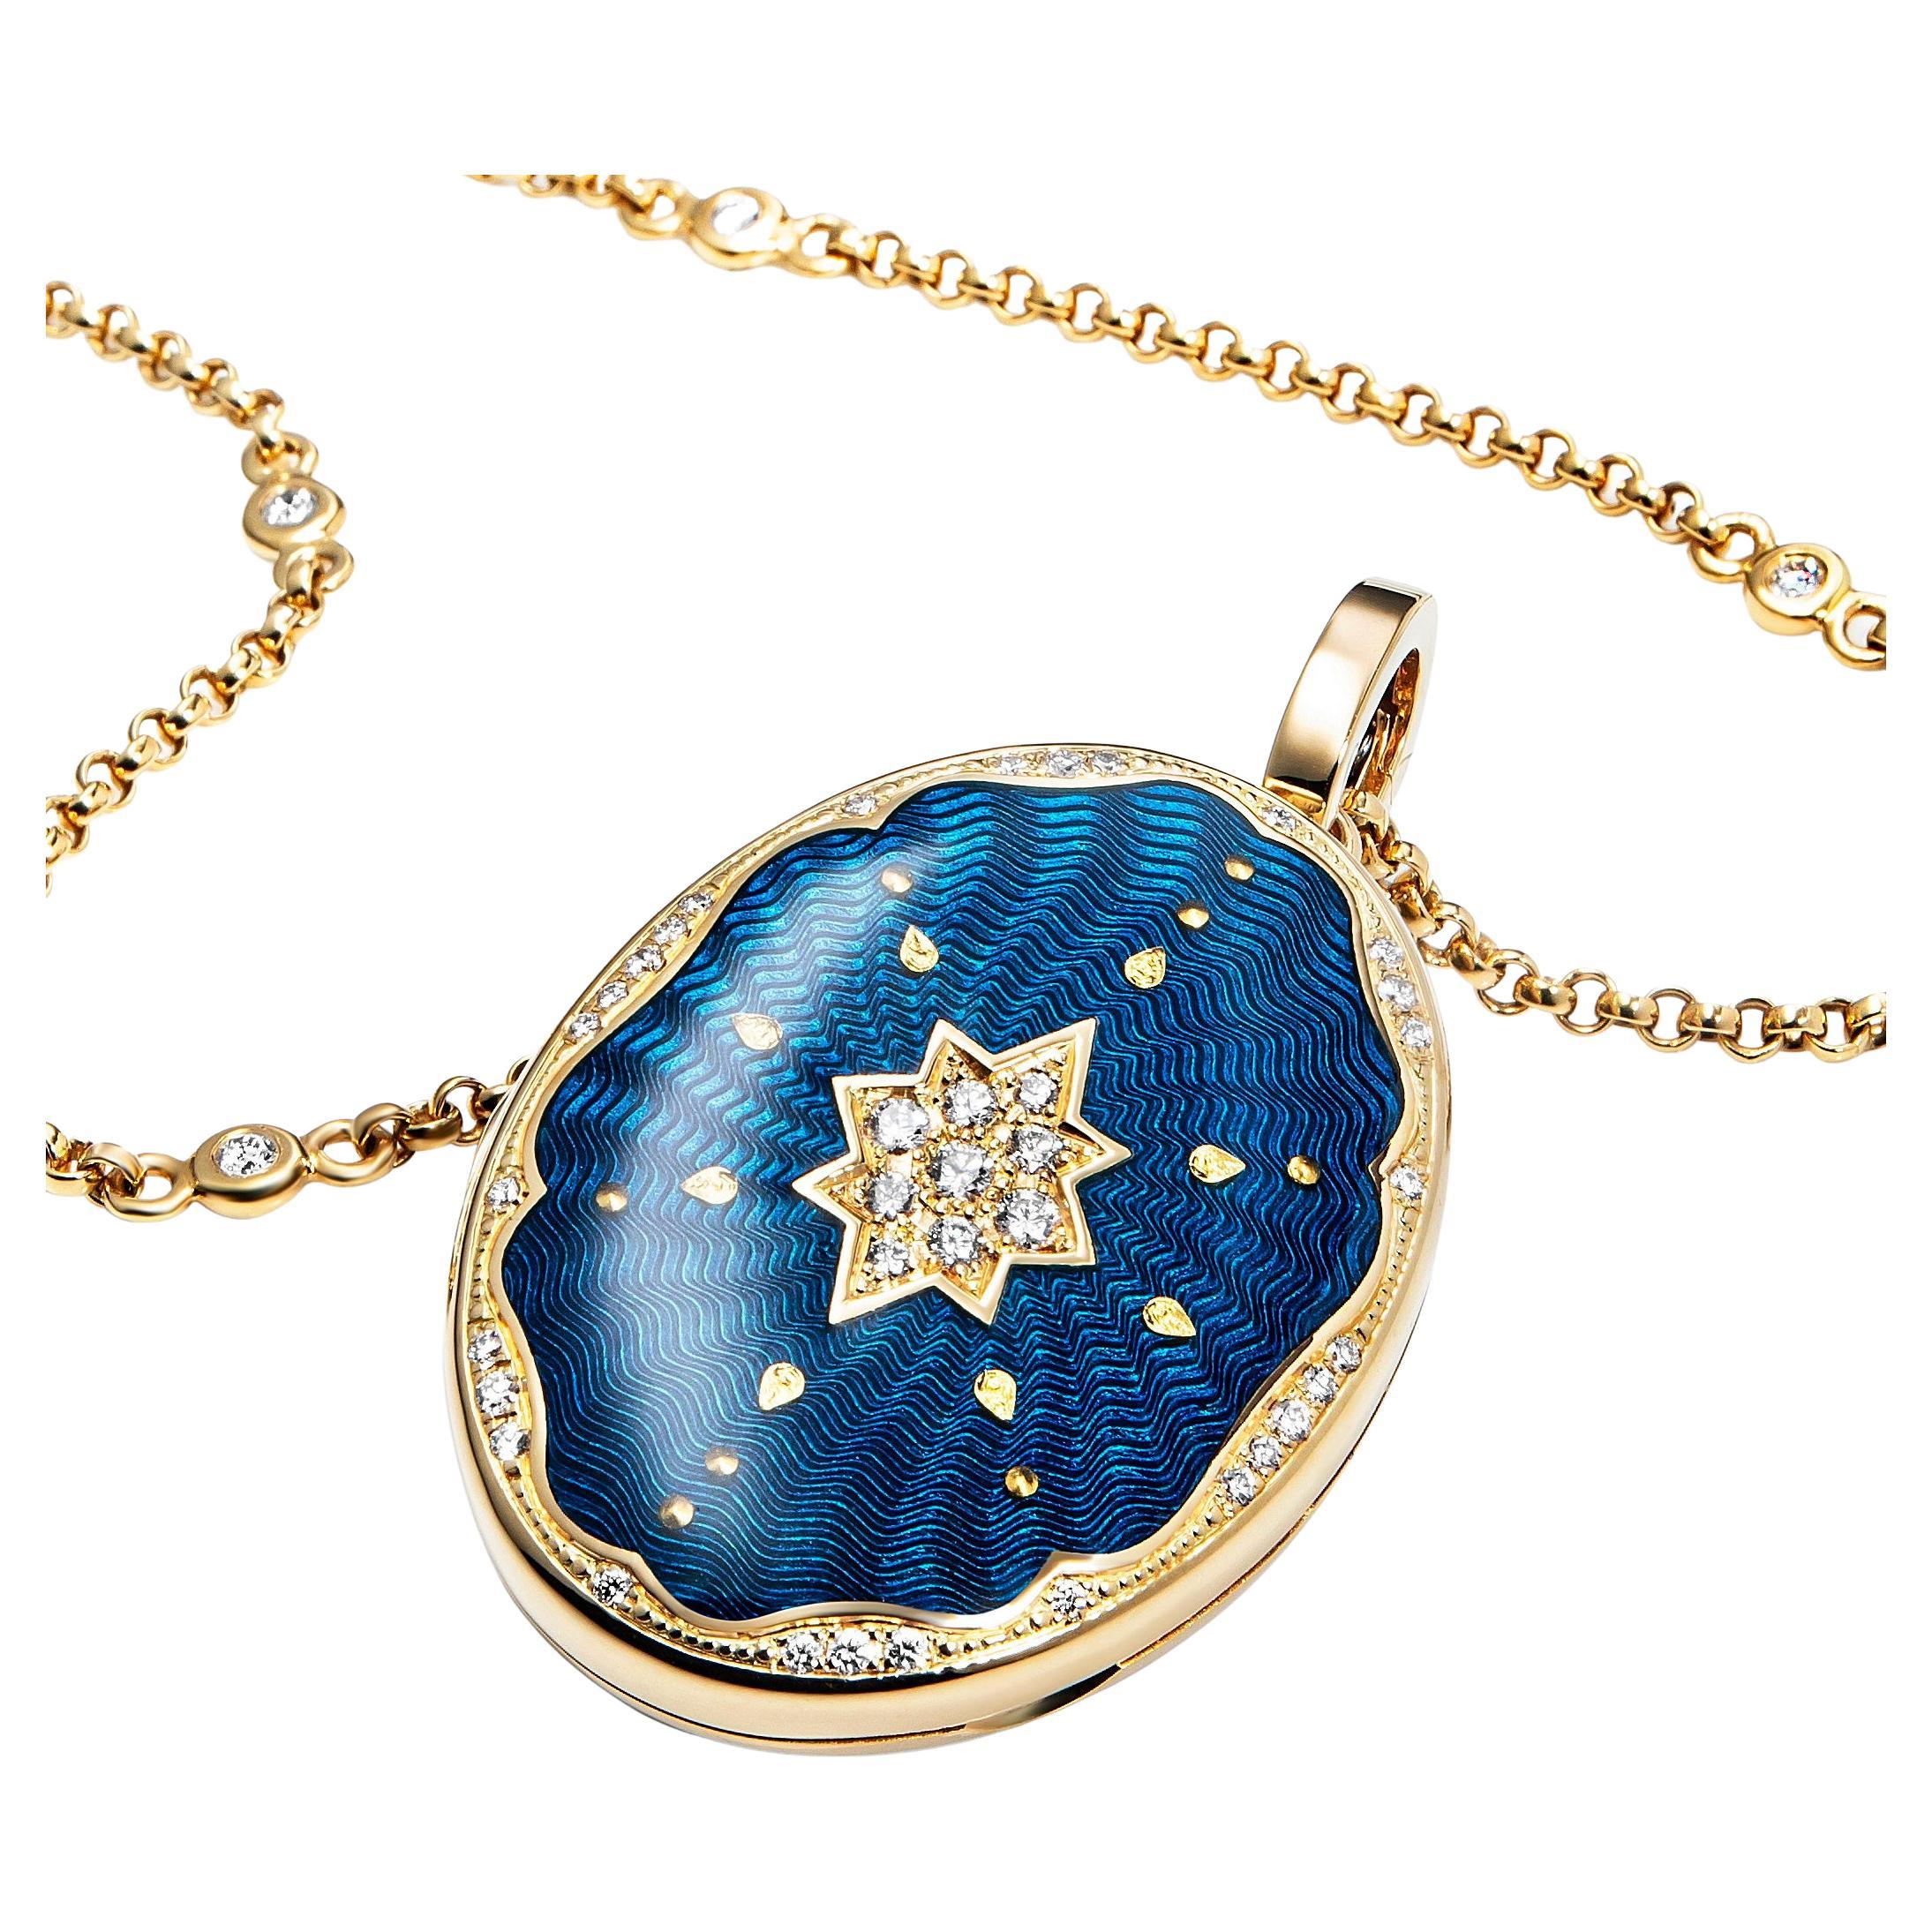 Victor Mayer oval pendant locket 18k yellow gold, Victoria collection, peacock blue vitreous enamel, gold paillons, 37 diamonds, total 0.29 ct, G VS, brilliant cut, measurements app. 25 mm x 35 mm

About the creator Victor Mayer
Victor Mayer is